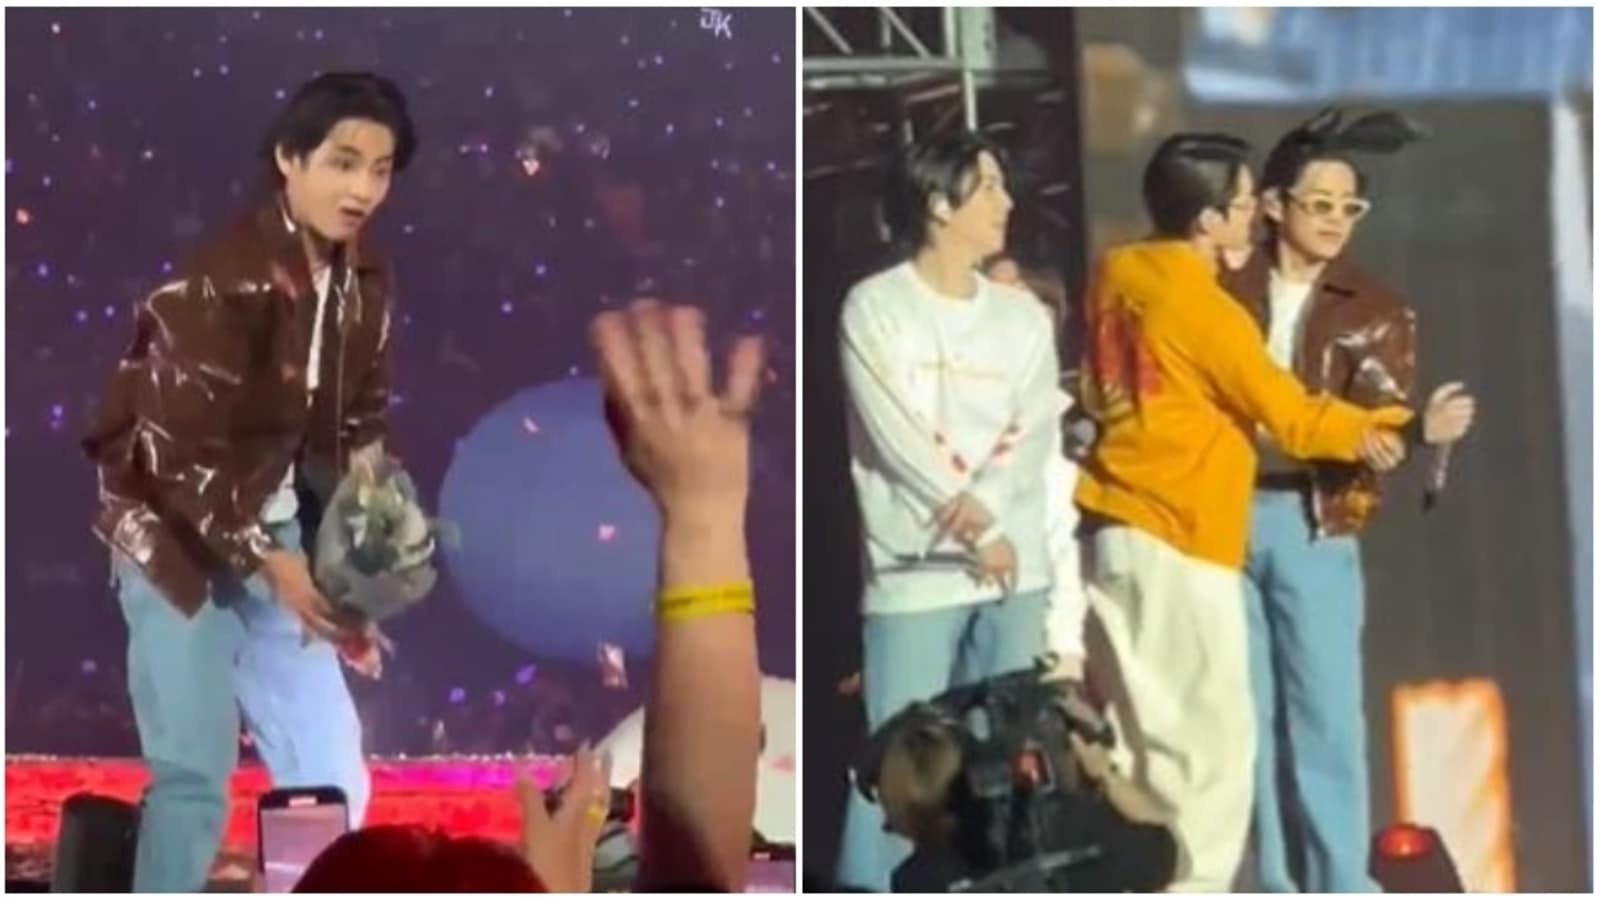 BTS' V gives fan a bouquet during concert, they toss it back ...